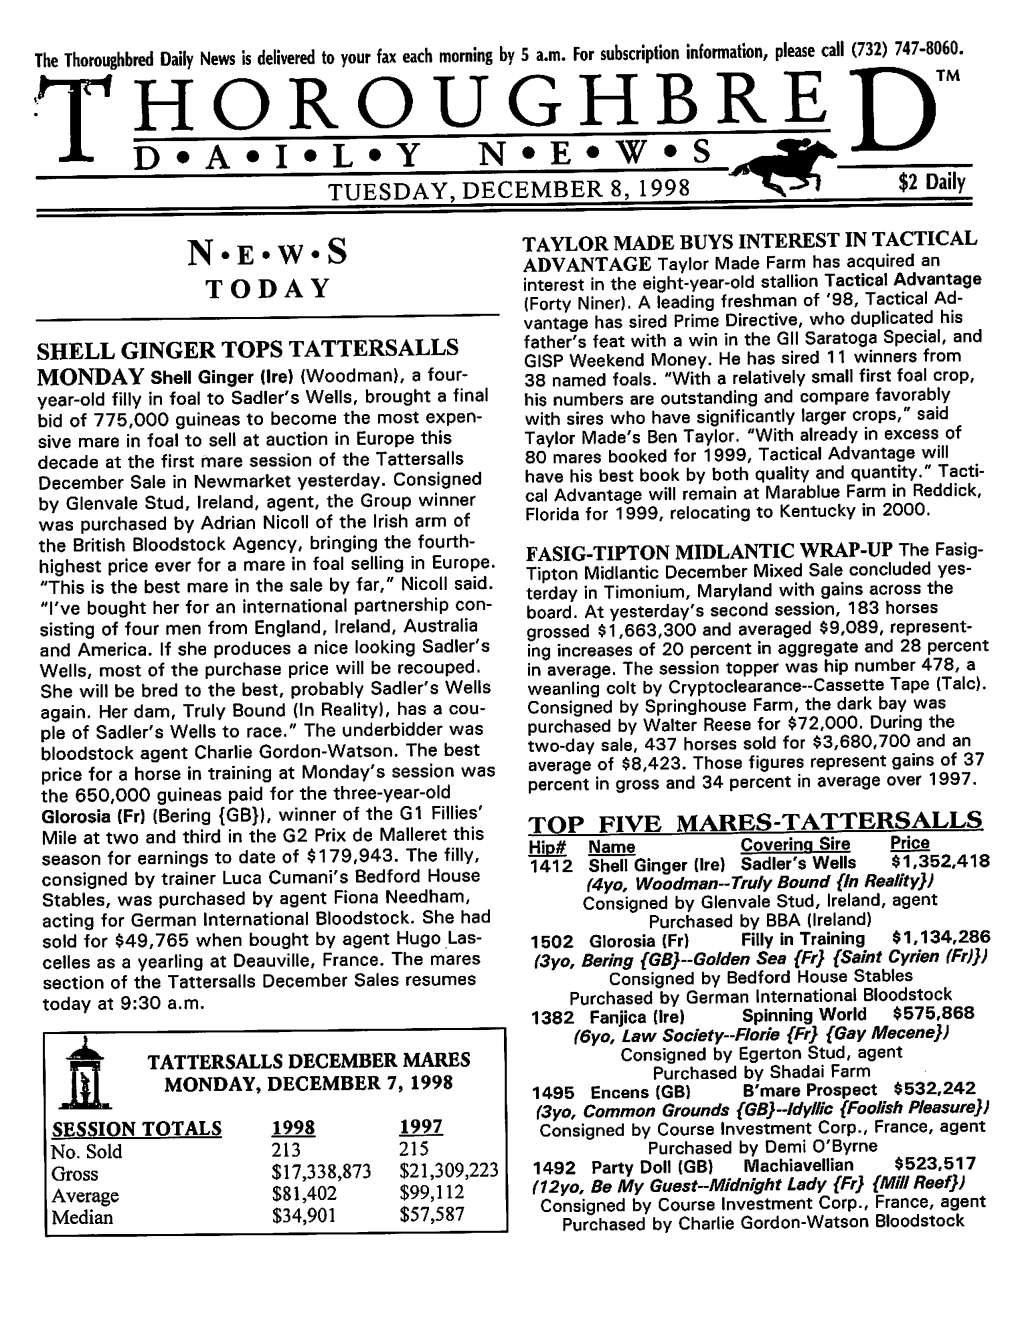 Thoroughbref)The Thoroughbred Daily News Is Delivered to Your Fax Each Morning by 5A.M